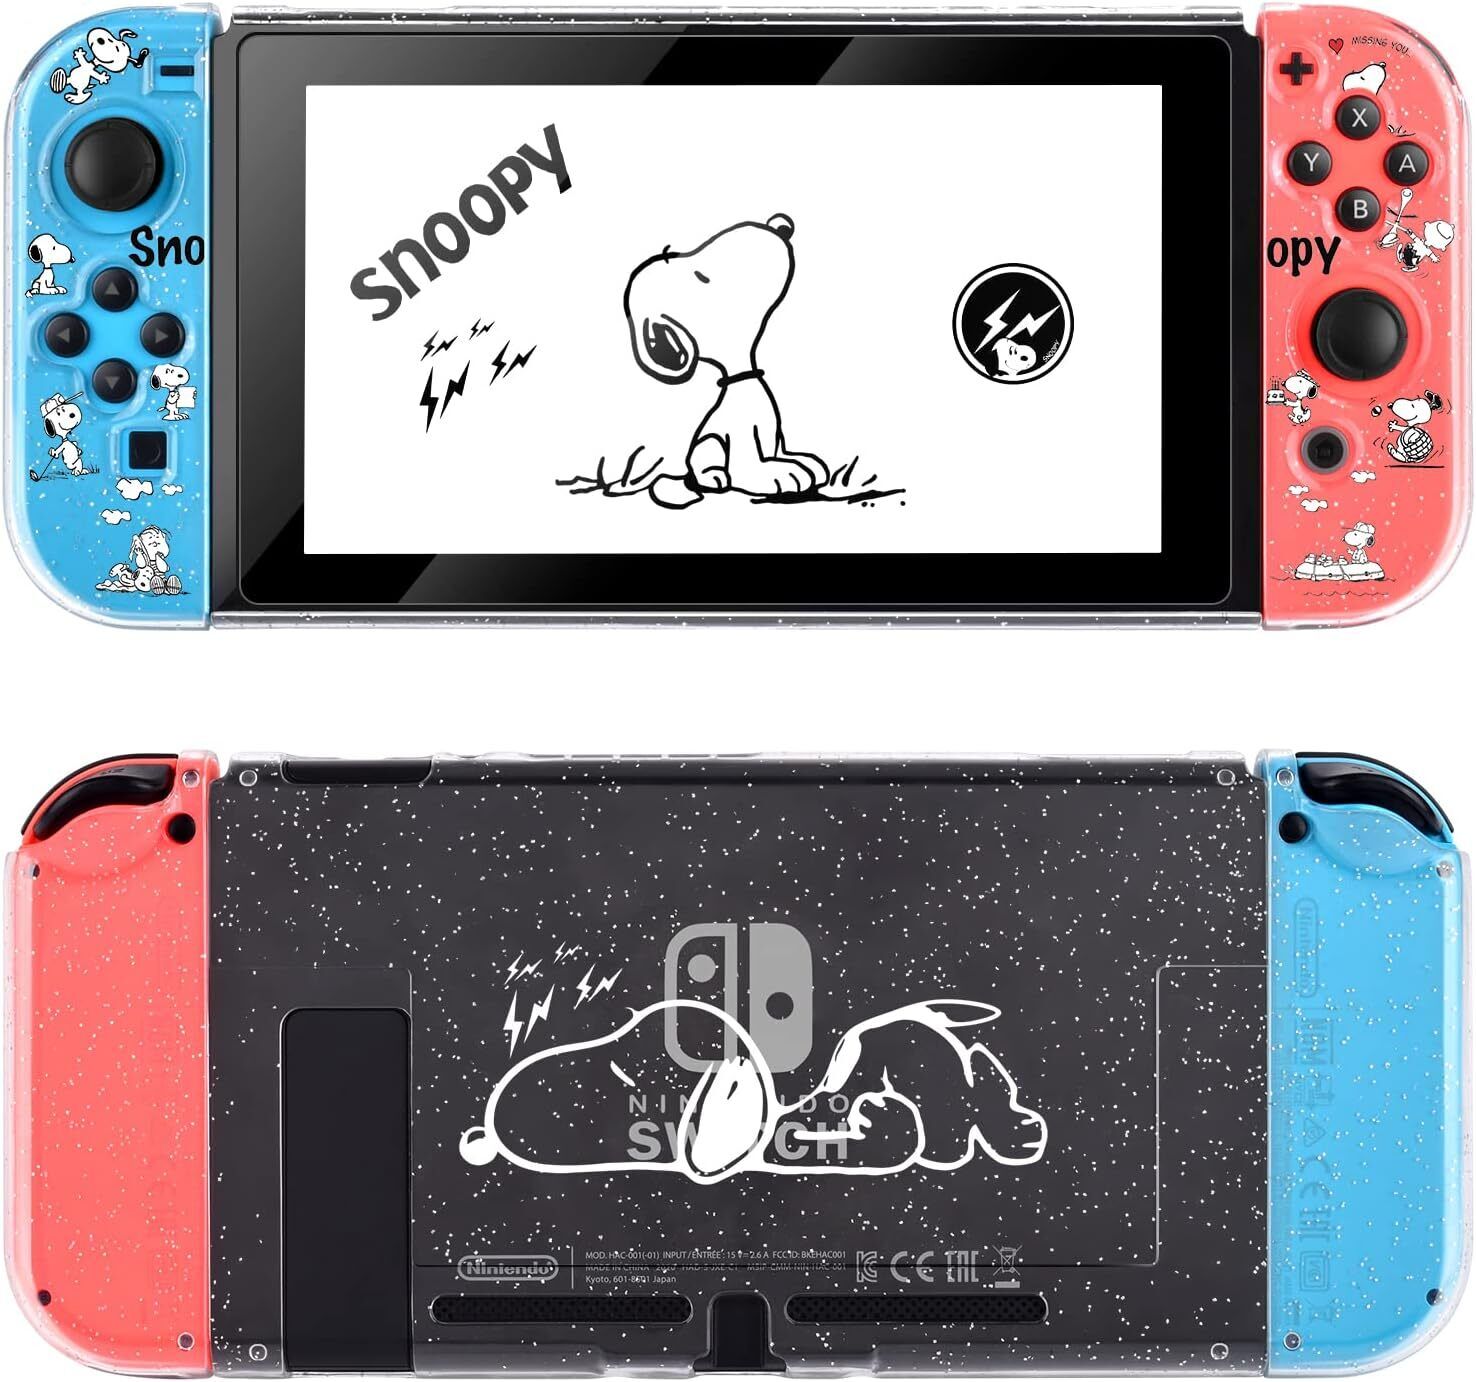 DLseego Snoopy Nintendo Switch Cover Clear Case From Japan